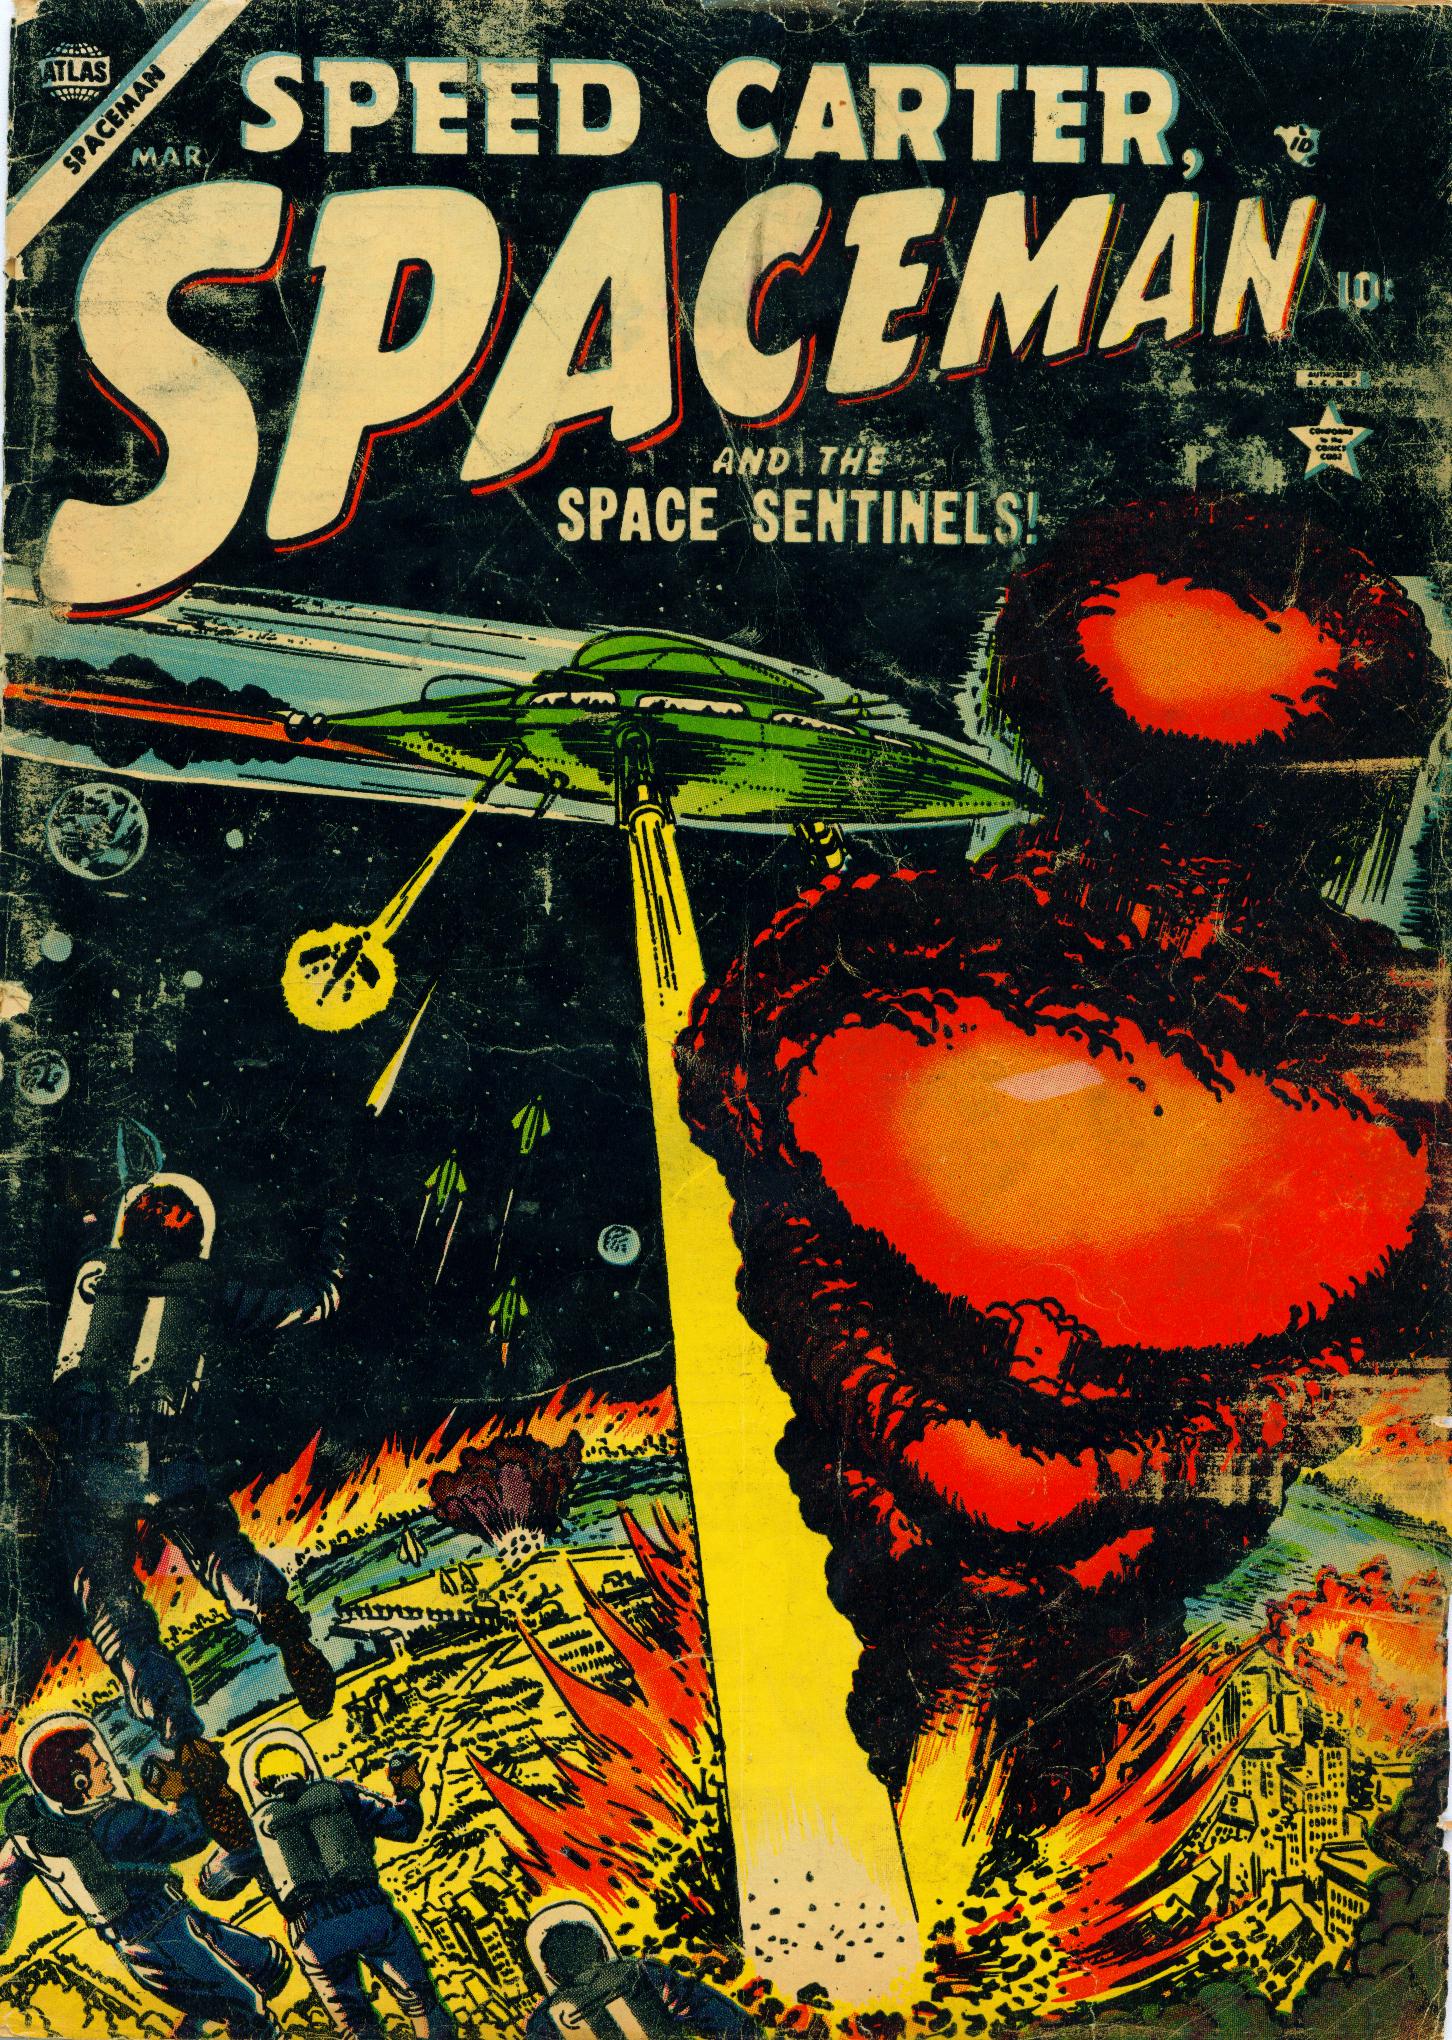 Read online Speed Carter, Spaceman comic -  Issue #4 - 1